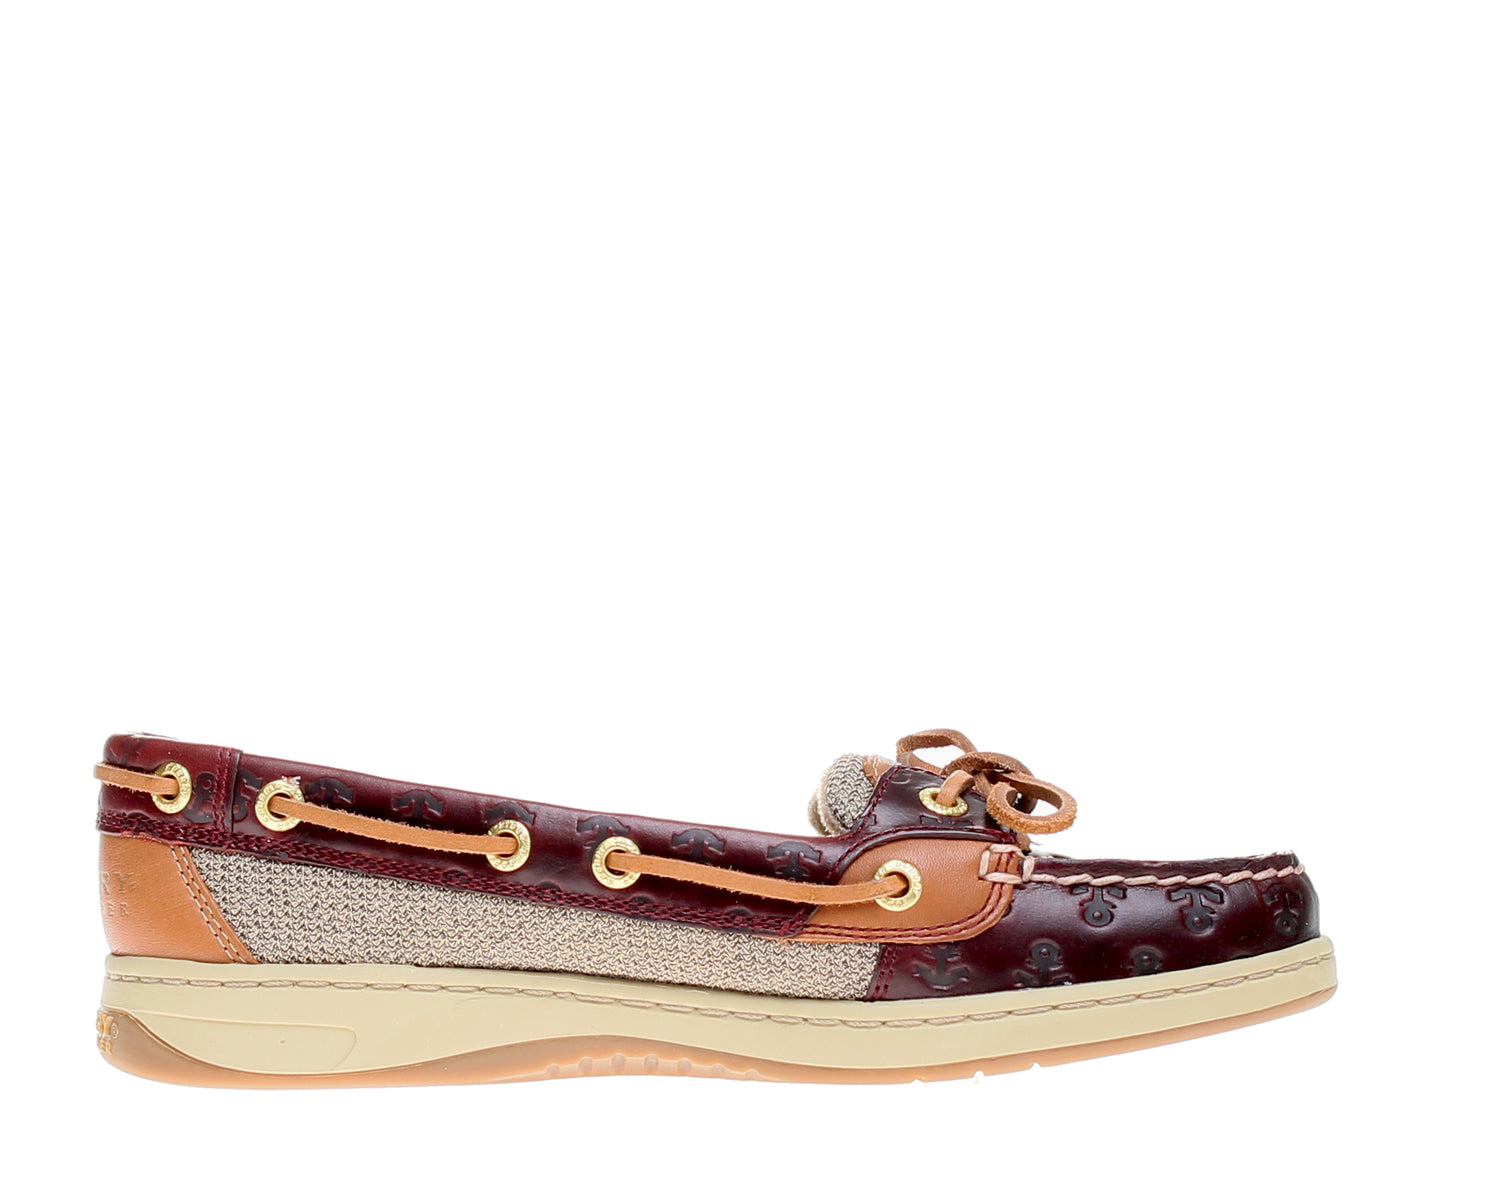 Sperry Top Sider Angelish Women's Slip On Boat Shoes